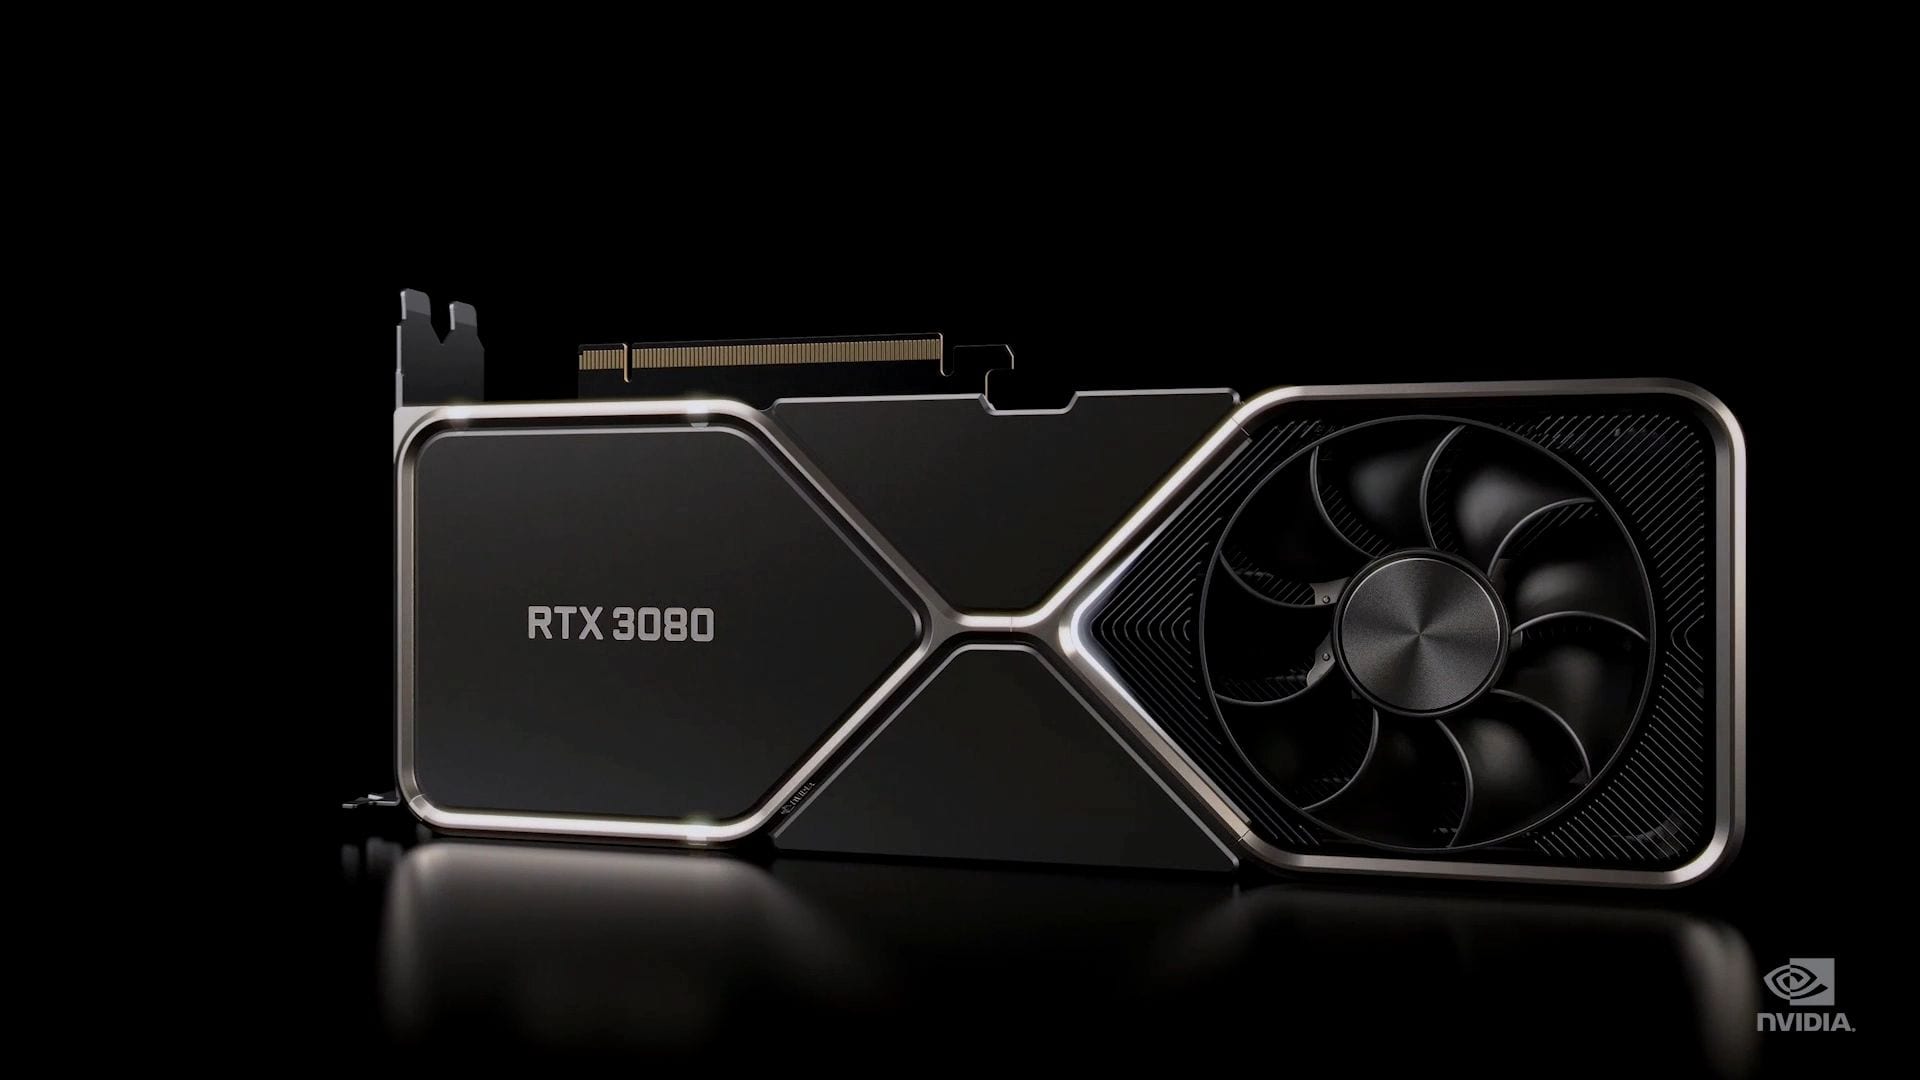 Nvidia Geforce RTX 3080 Looks Quite Fetching in Official Unboxing Video